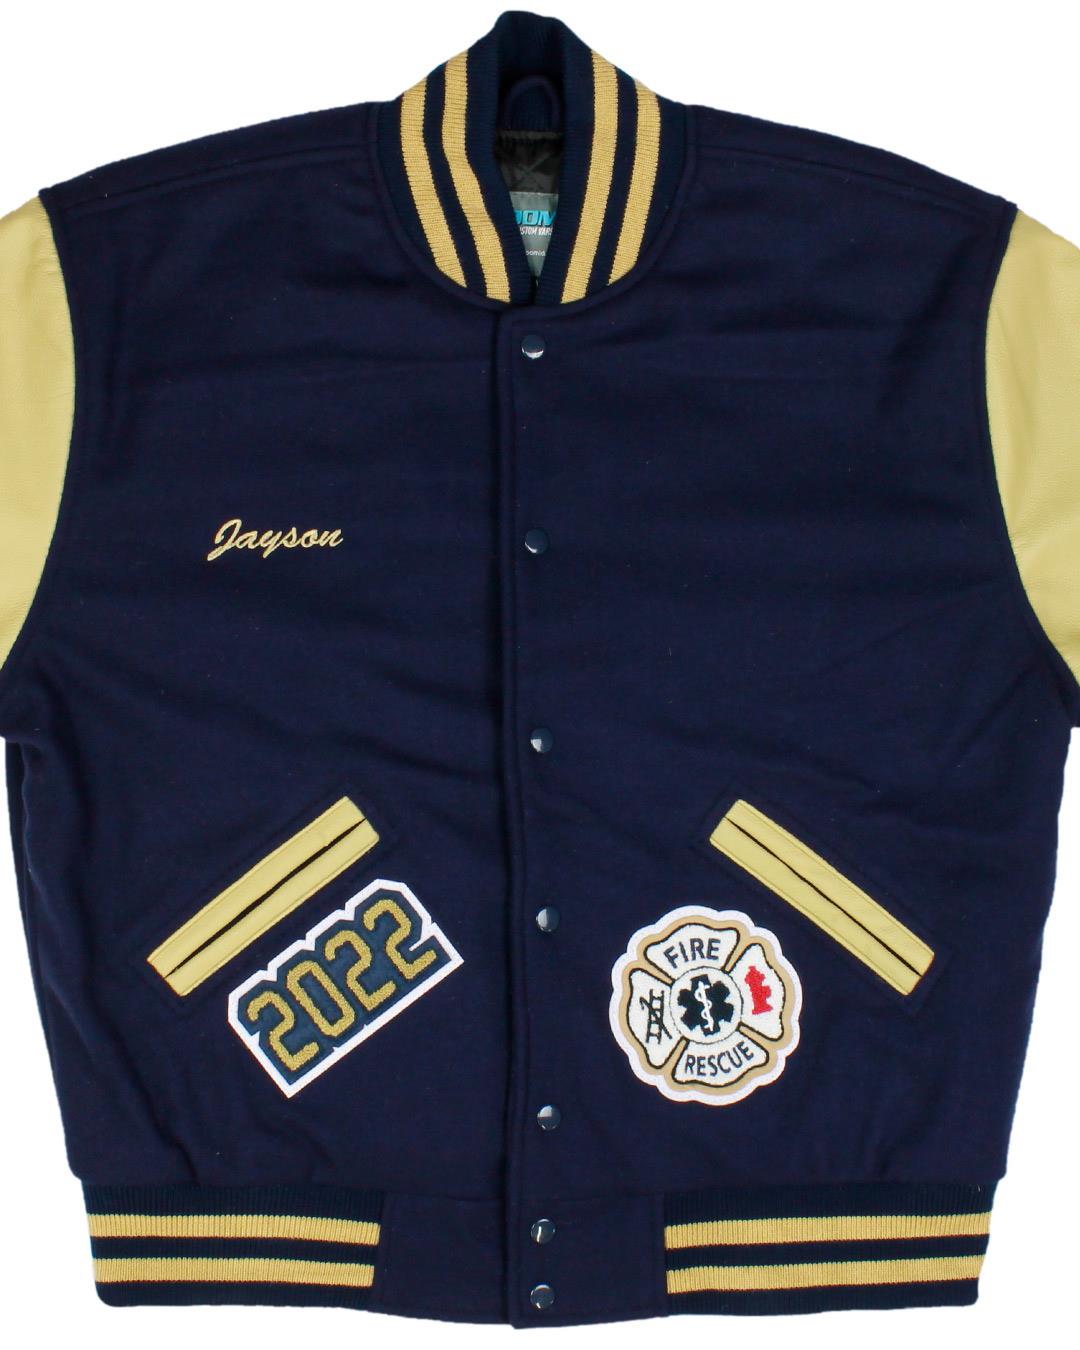 Lakeview High School Letterman Jacket, Lakeview, MI - Front